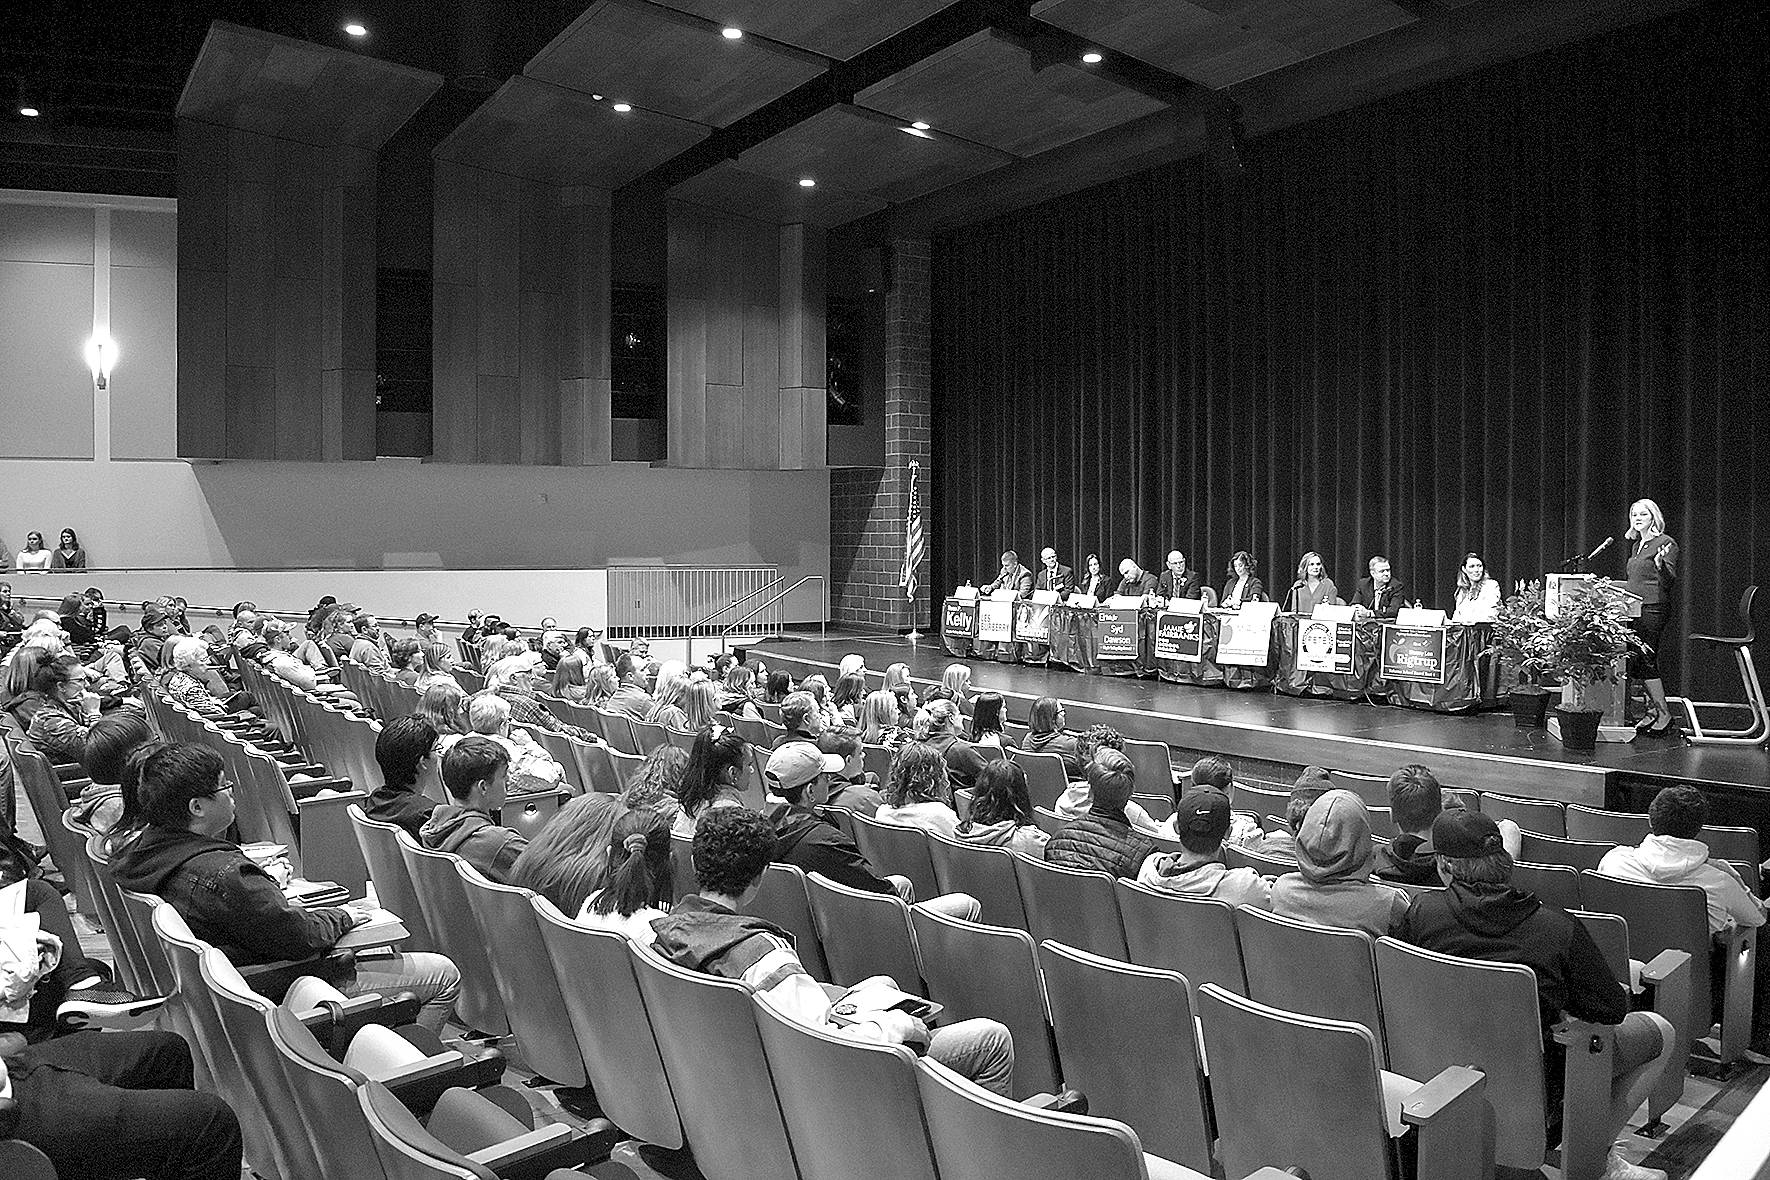 Photo by Haley Ausbun. The Maple Valley candidate forum, hosted by Maple Valley Black Diamond Chamber of Commerce, Thursday, Oct. 17 at Tahoma High School.